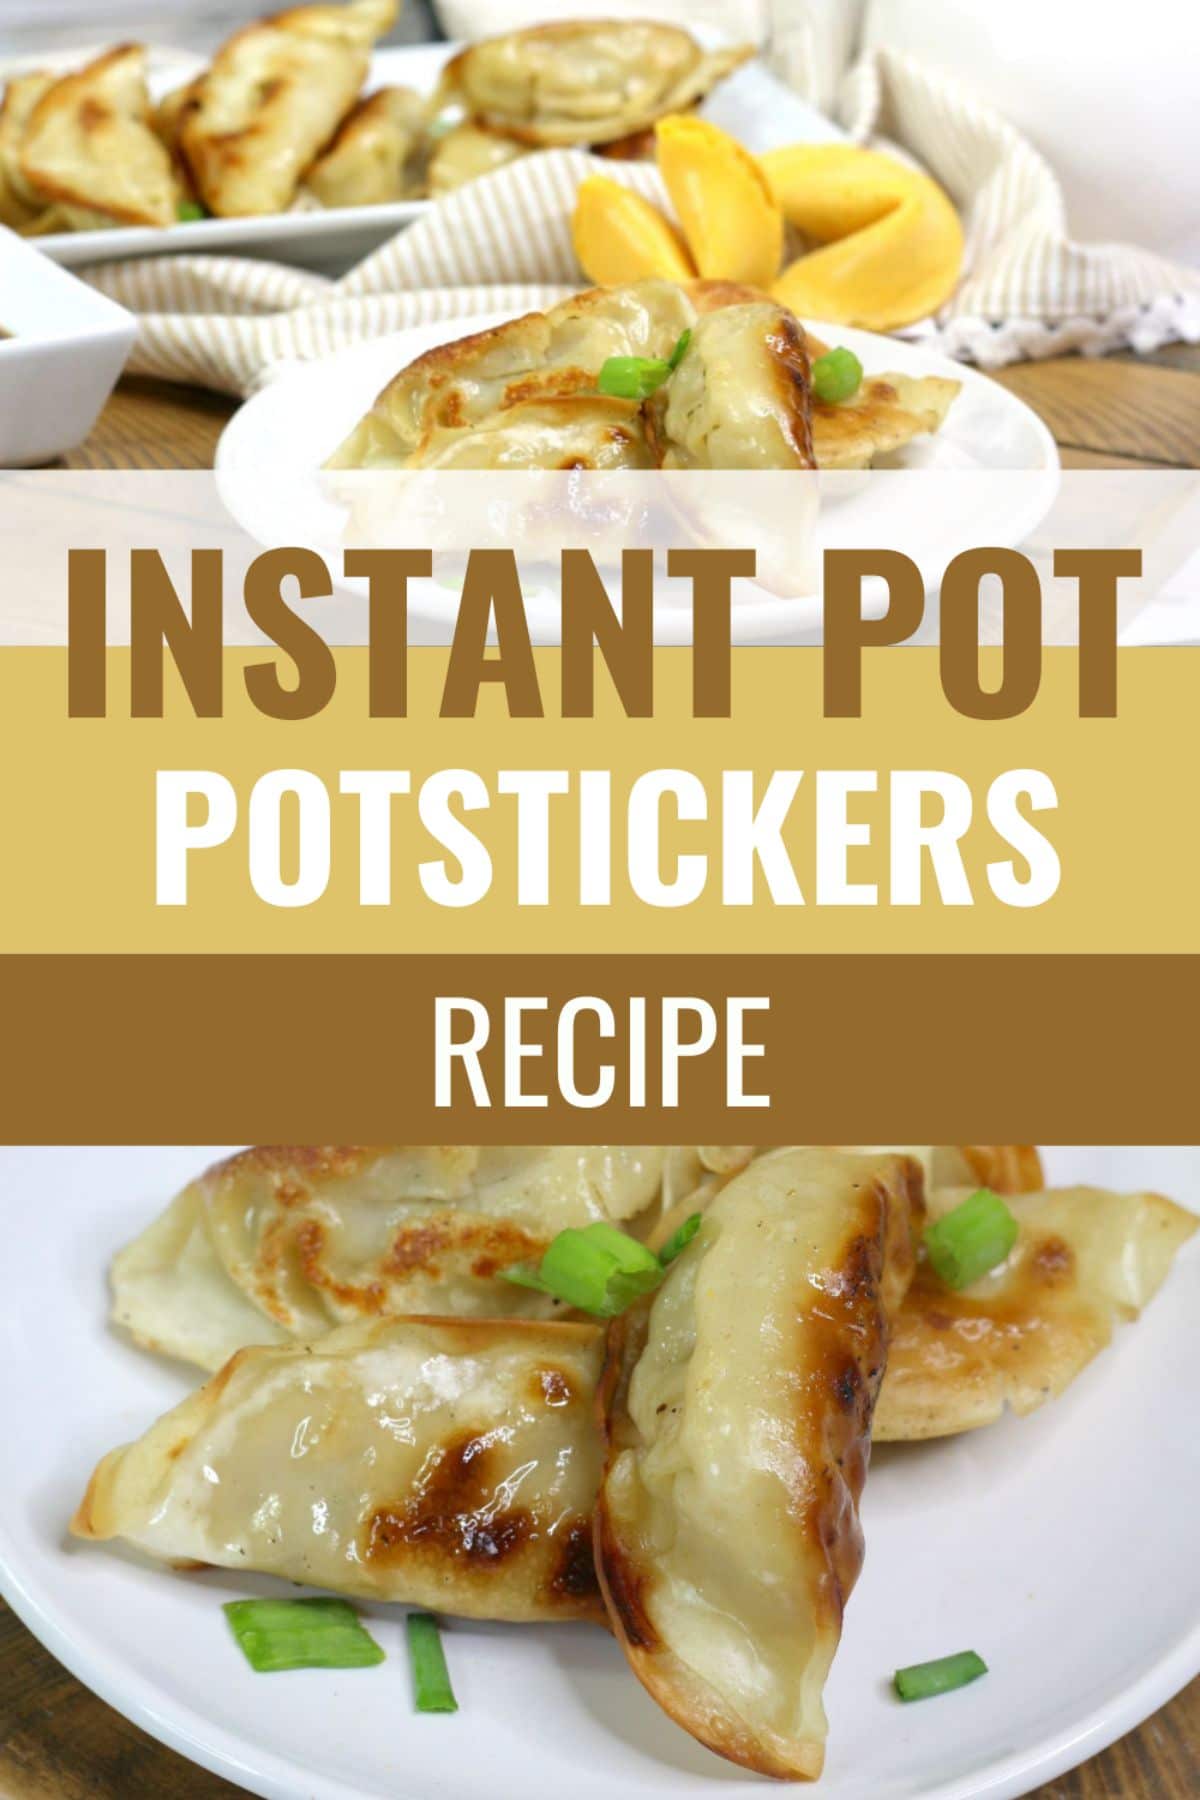 Instant Pot Potstickers are delicious and homemade Chinese potstickers that cook quickly in your pressure cooker. It's a great appetizer! #instantpot #pressurecooker #potstickers #chinesefood #appetizer via @wondermomwannab